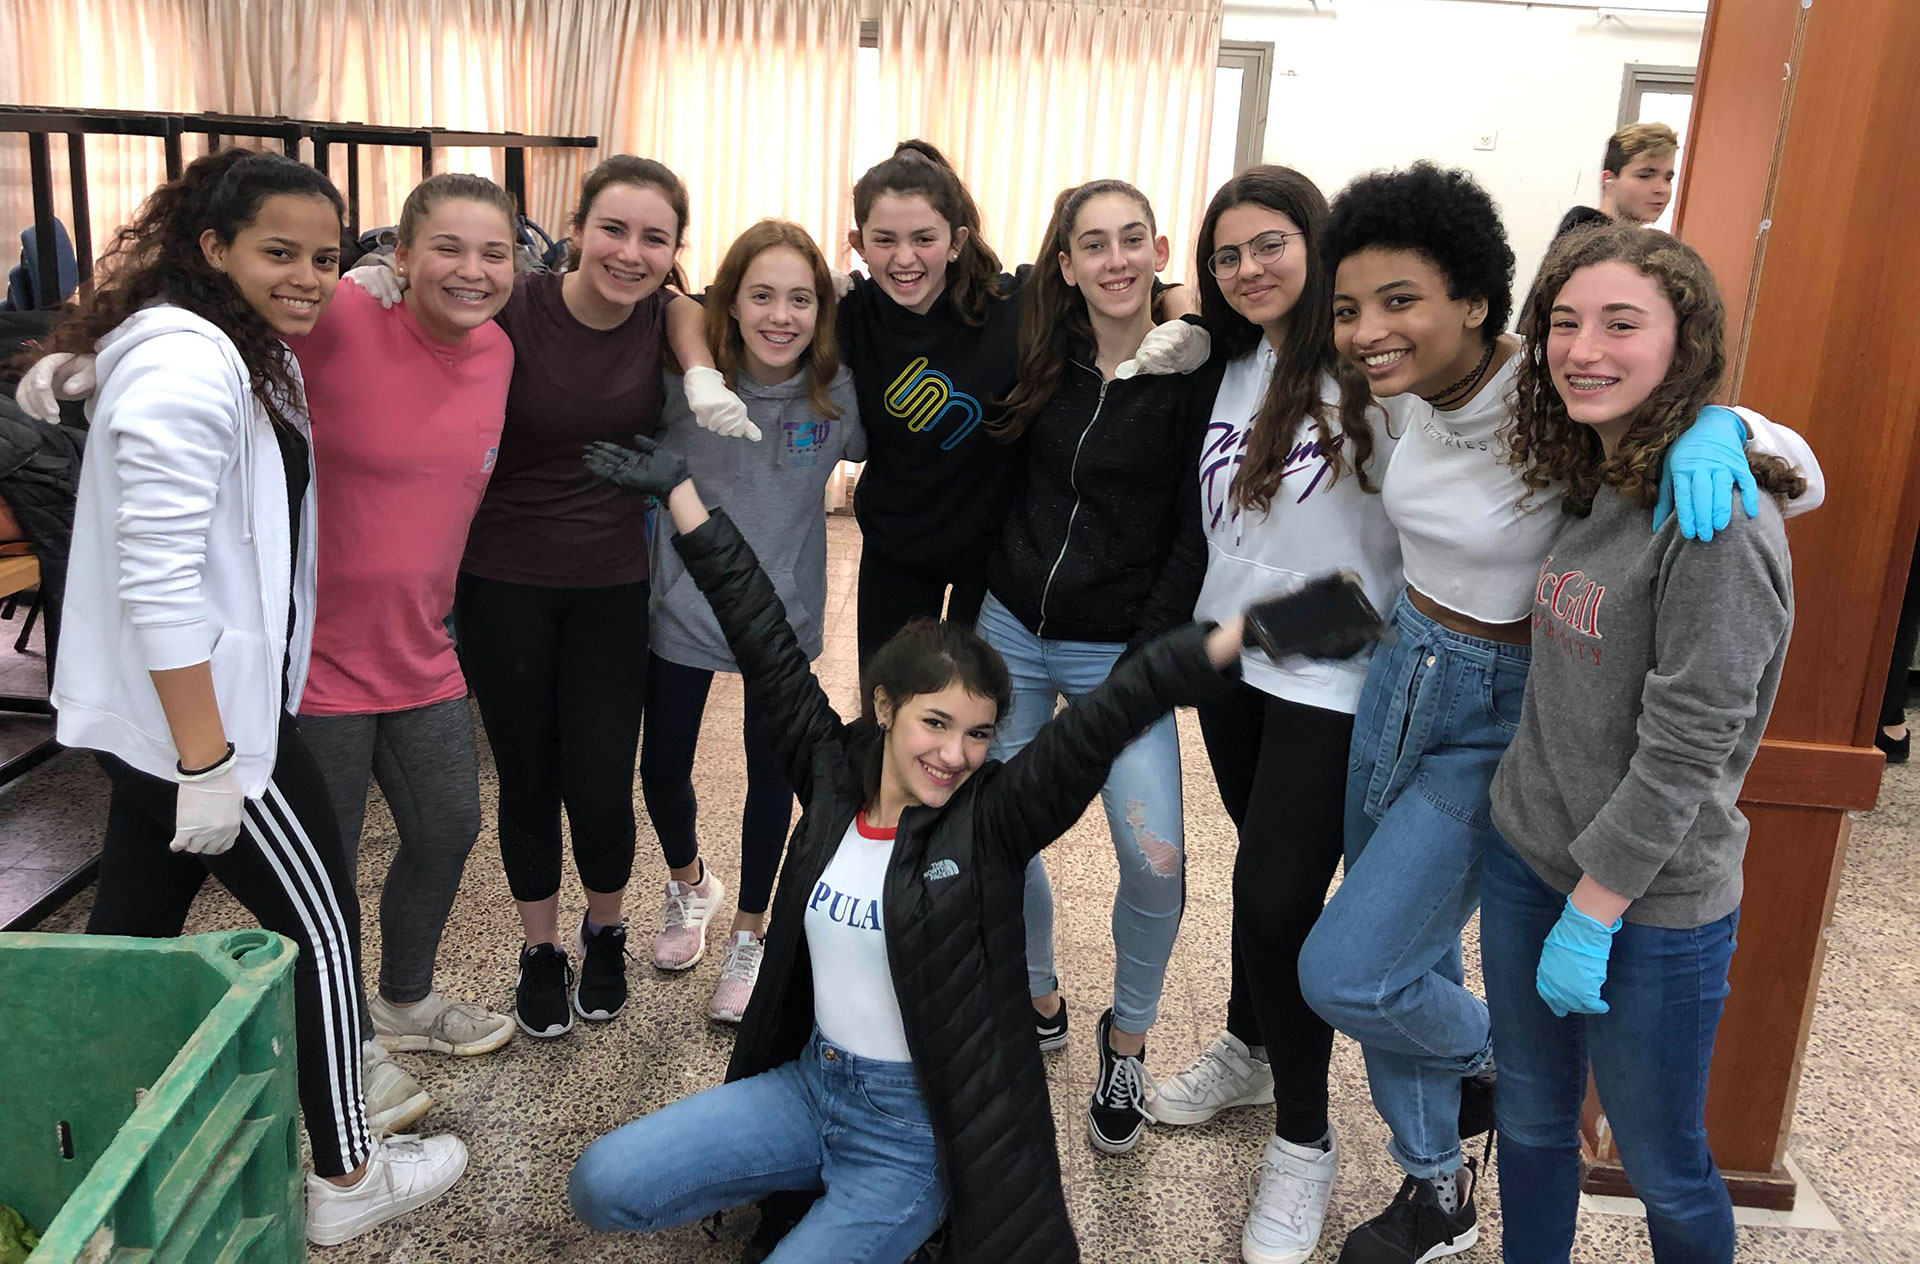 A group of Israeli and American girls pose for a group photo.